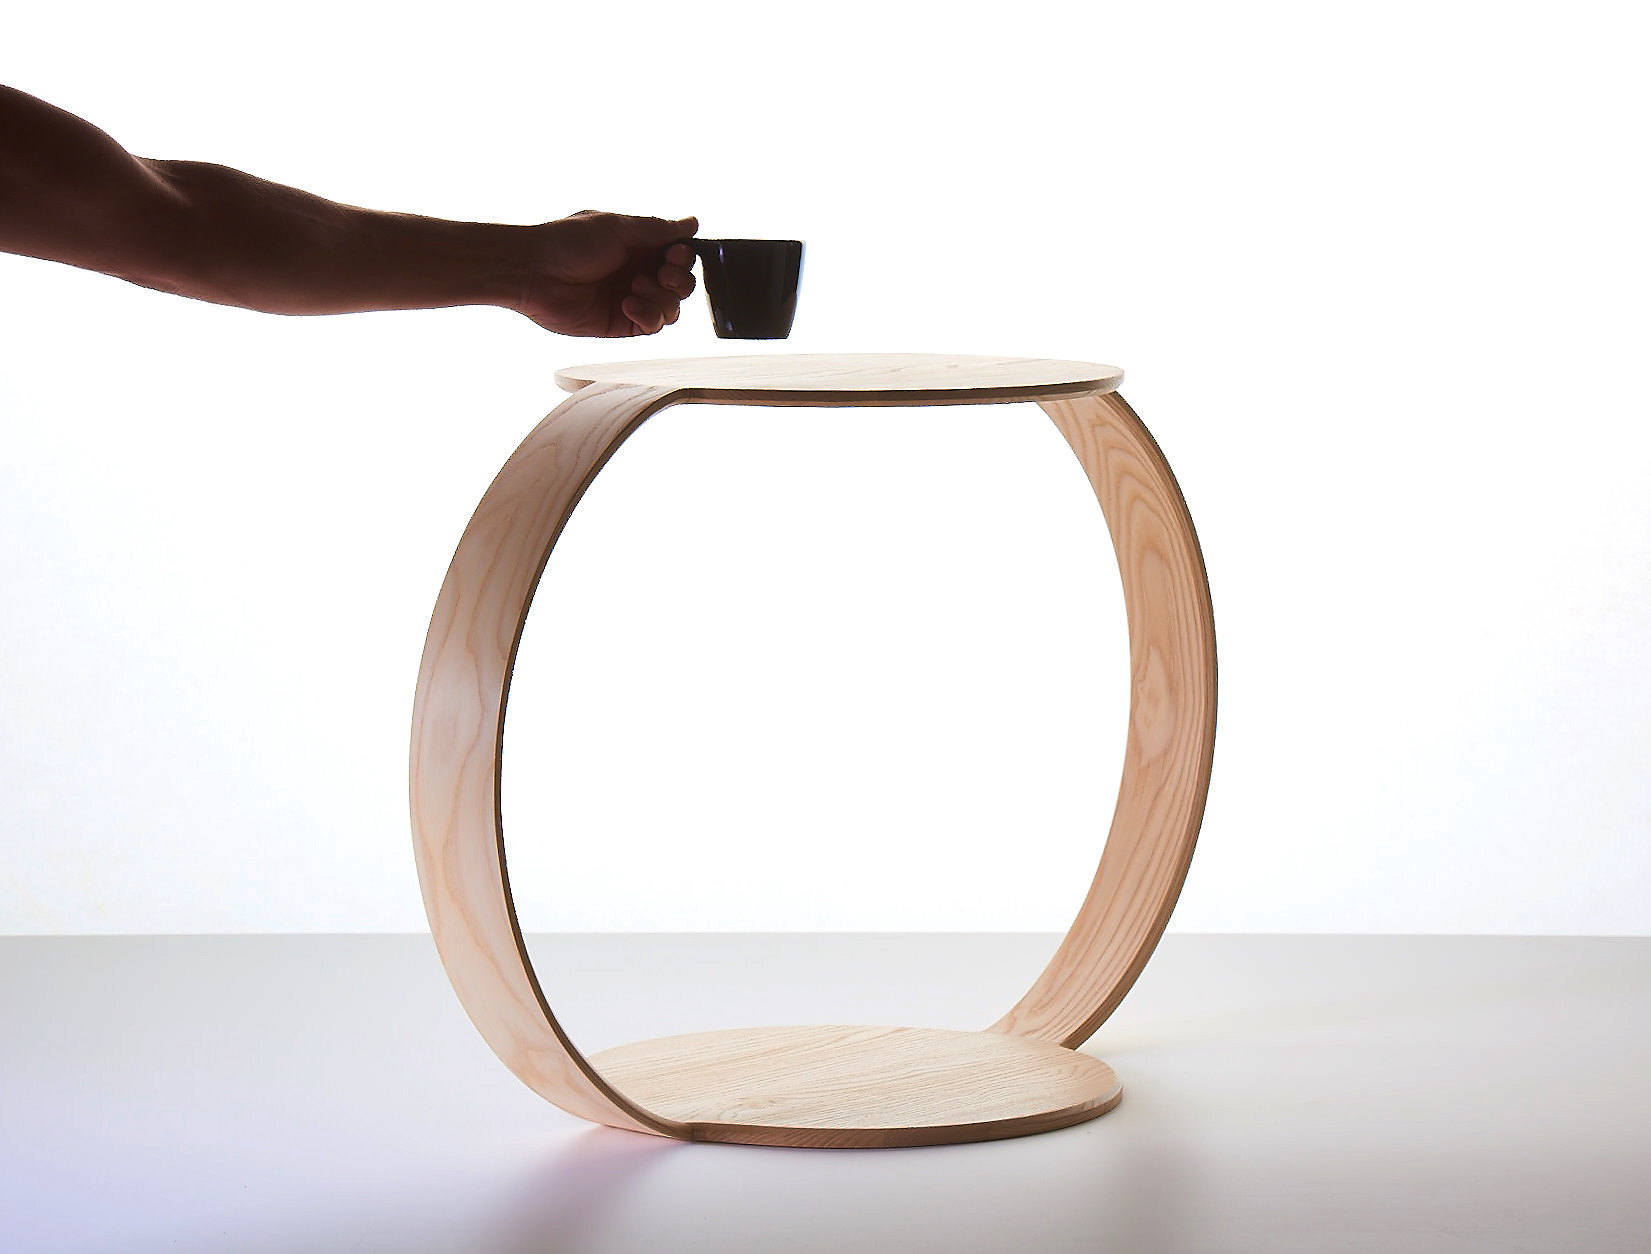 You are currently viewing ”THE NEVERENDING TABLE” AT DUTCH DESIGN WEEK